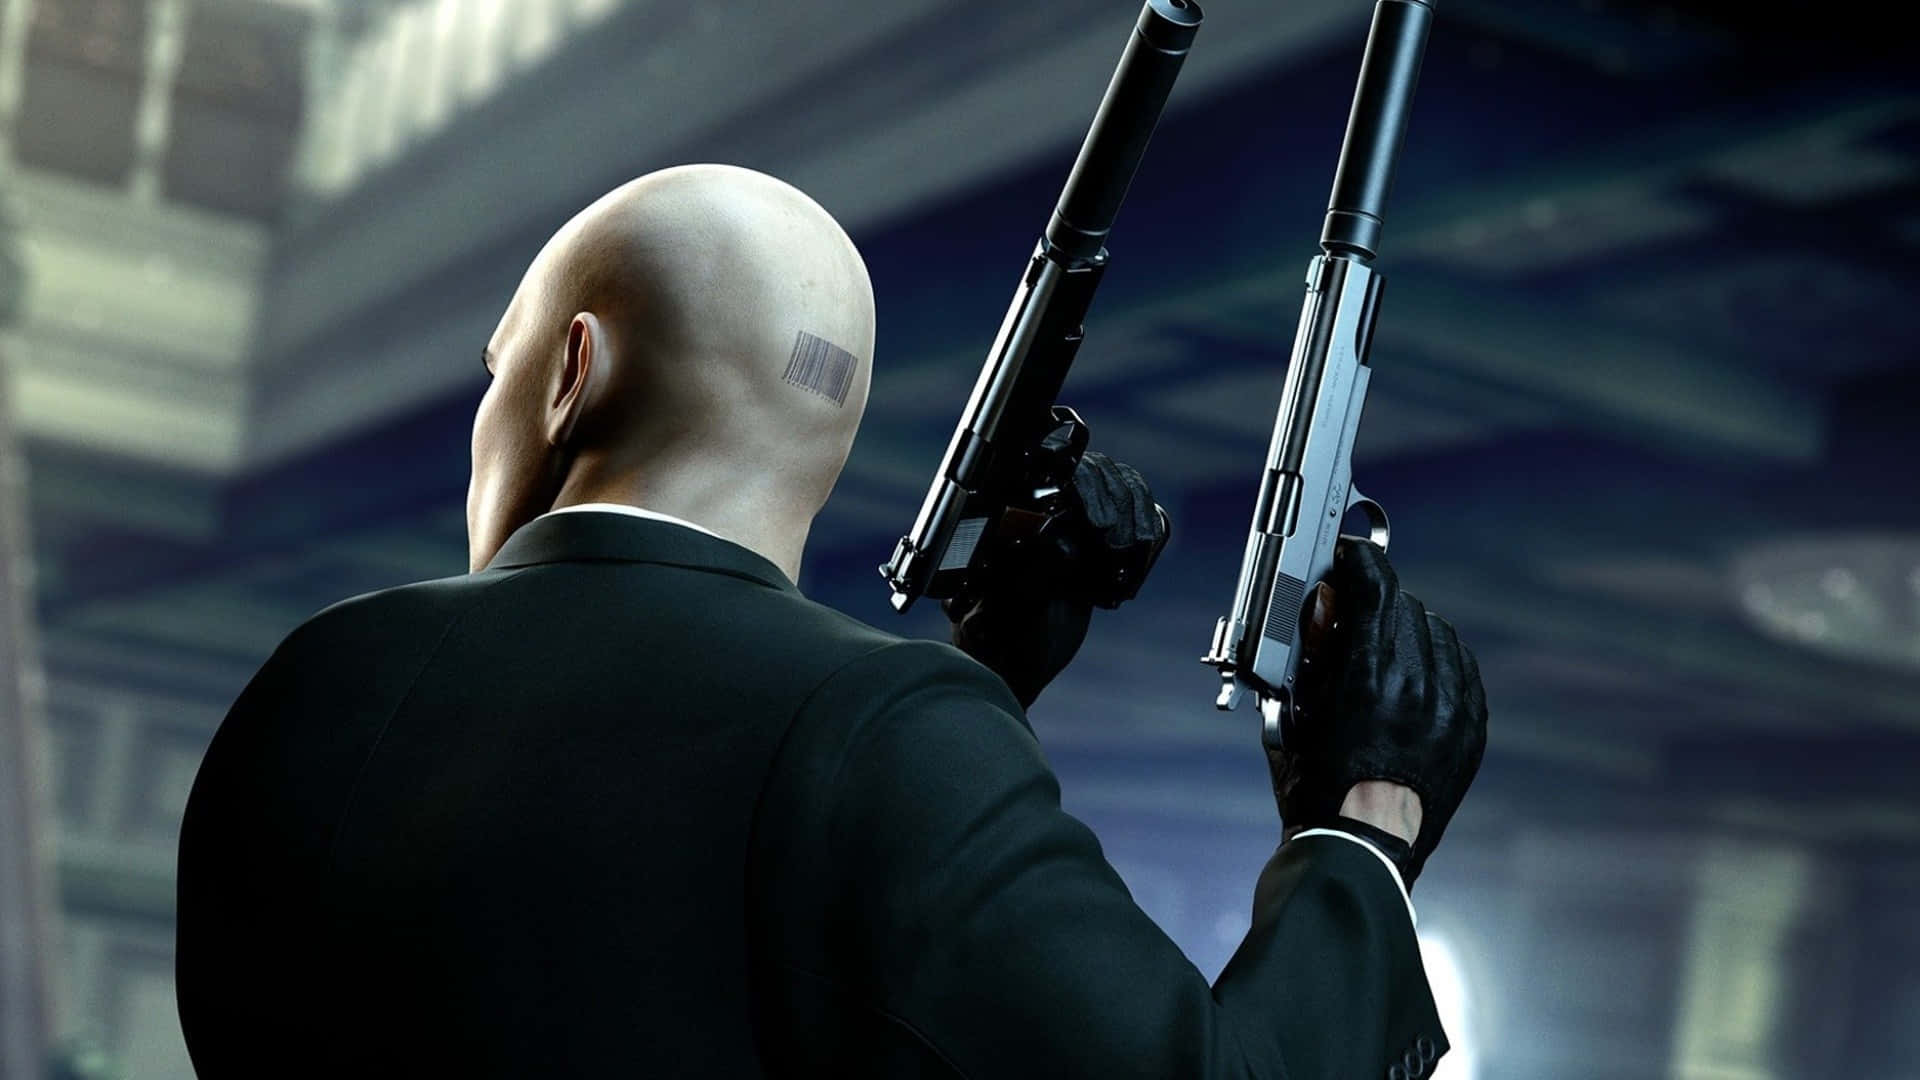 Agent 47 takes aim in a beautiful outdoor environment